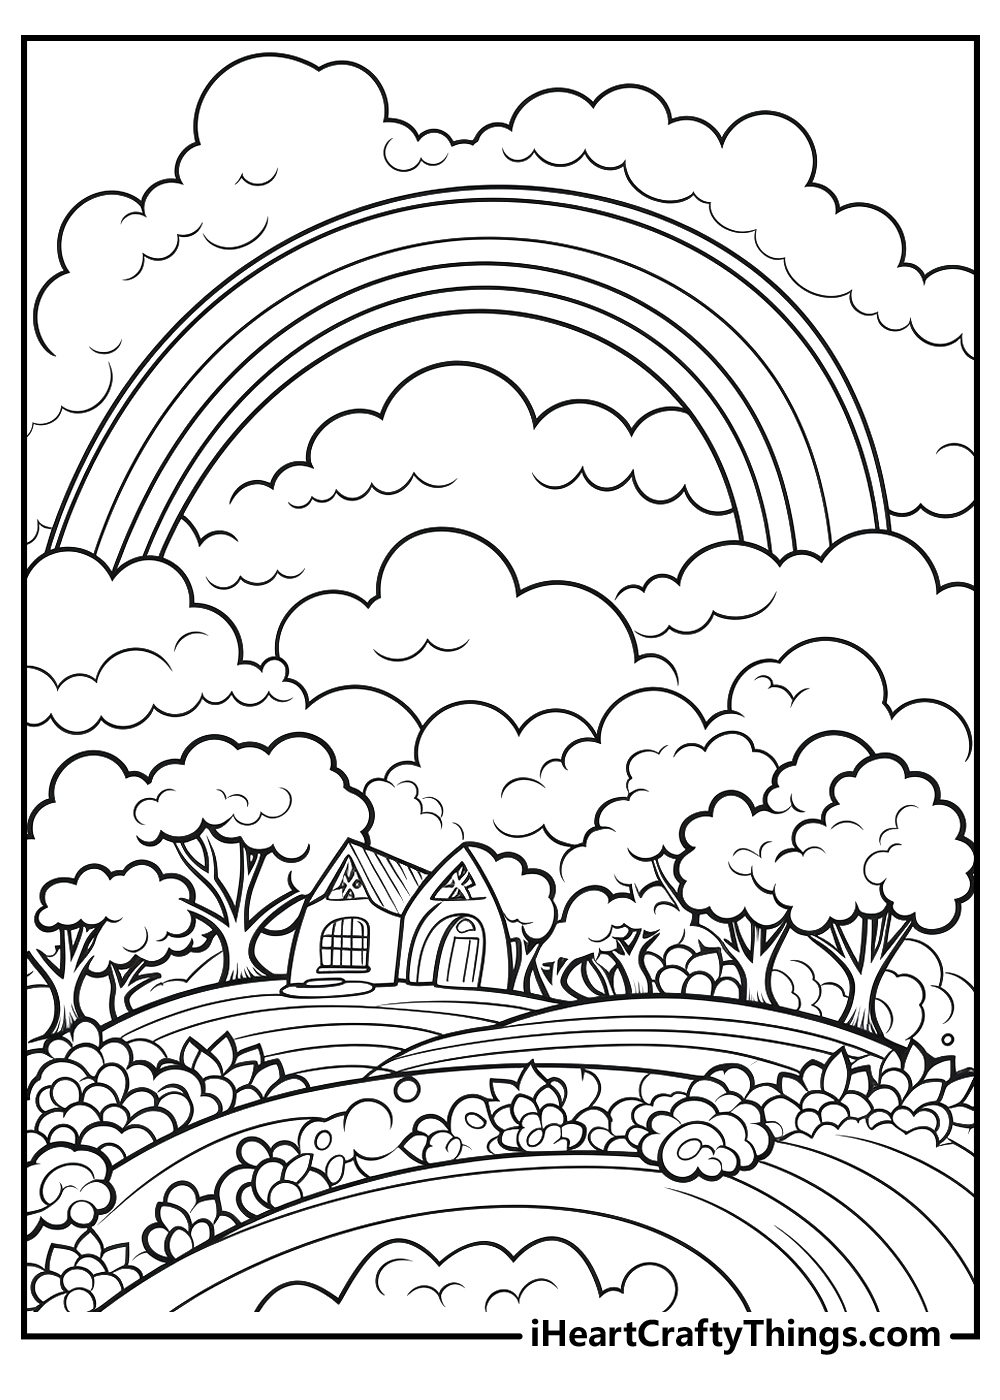 rainbow coloring pages free download